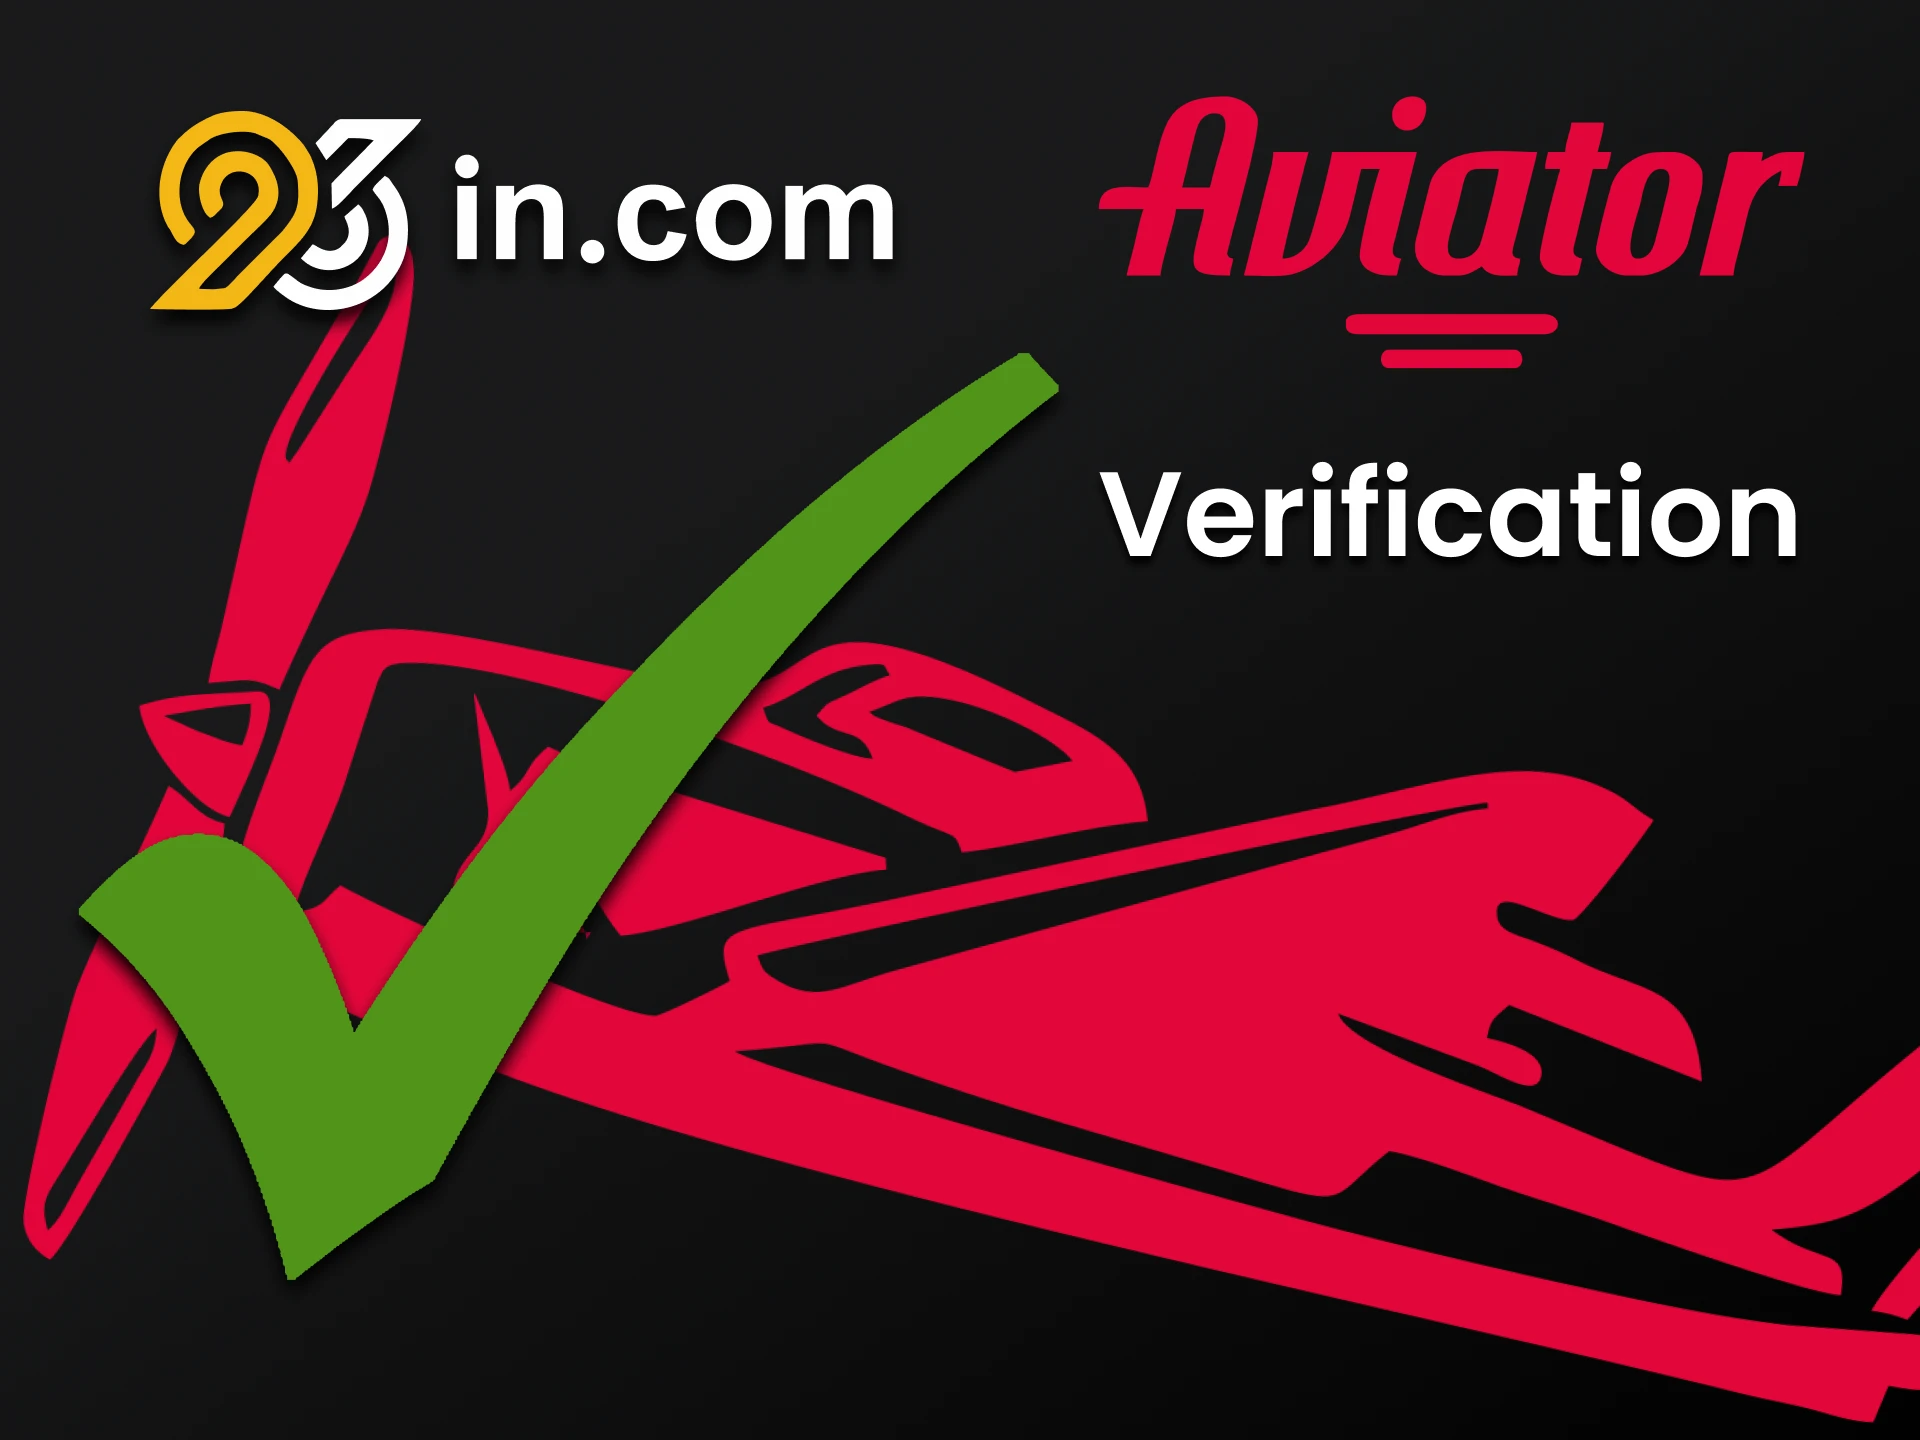 Fill in your personal details at 96in to play Aviator.